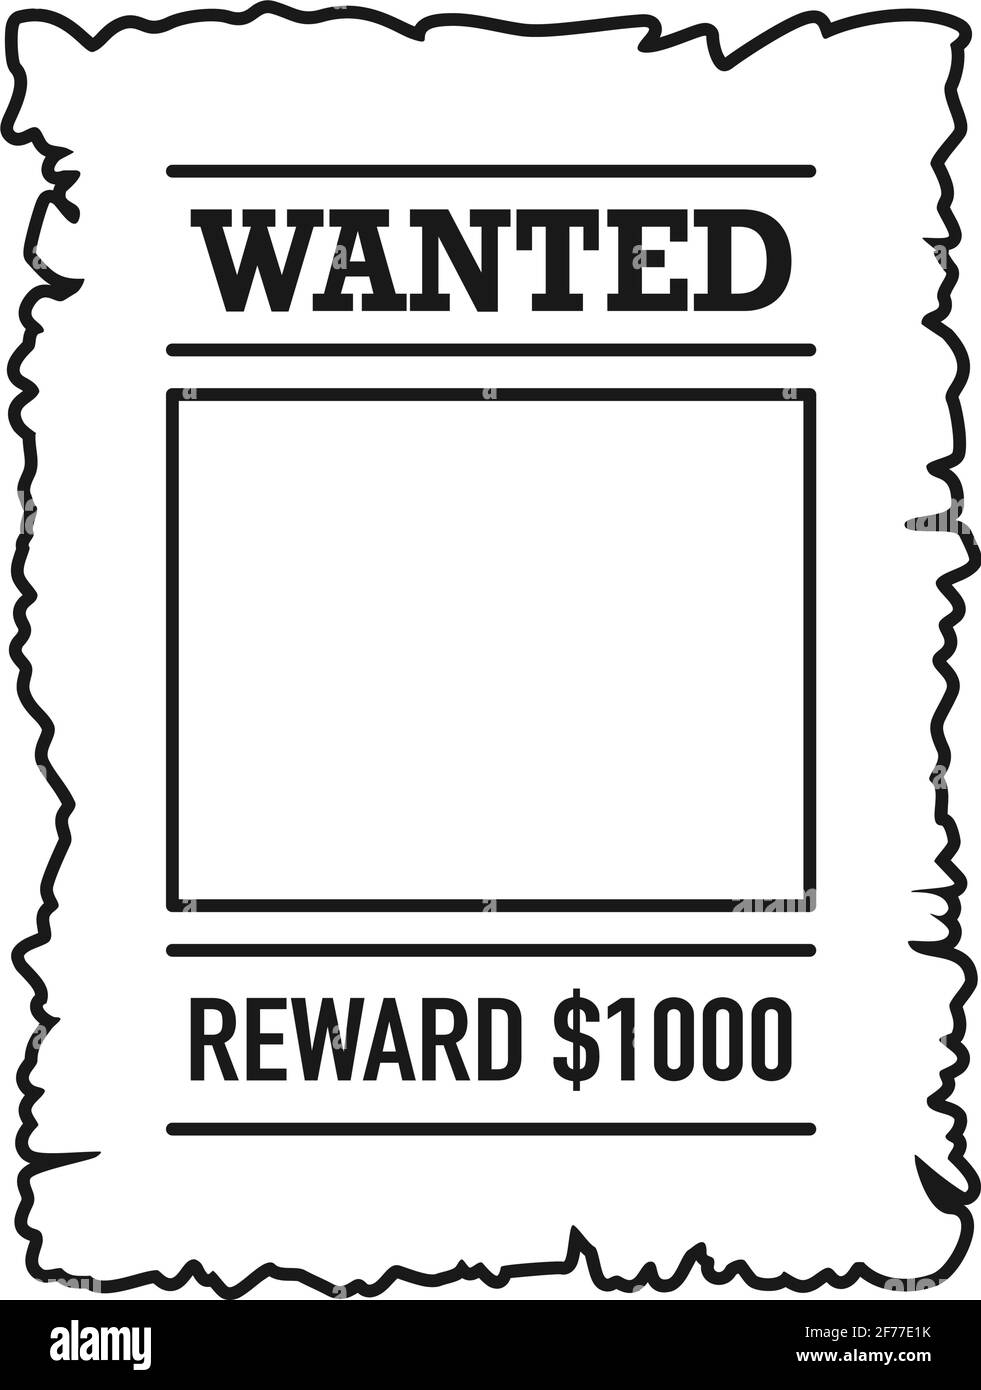 Template of wanted poster with blank frame in vector outline Stock Vector